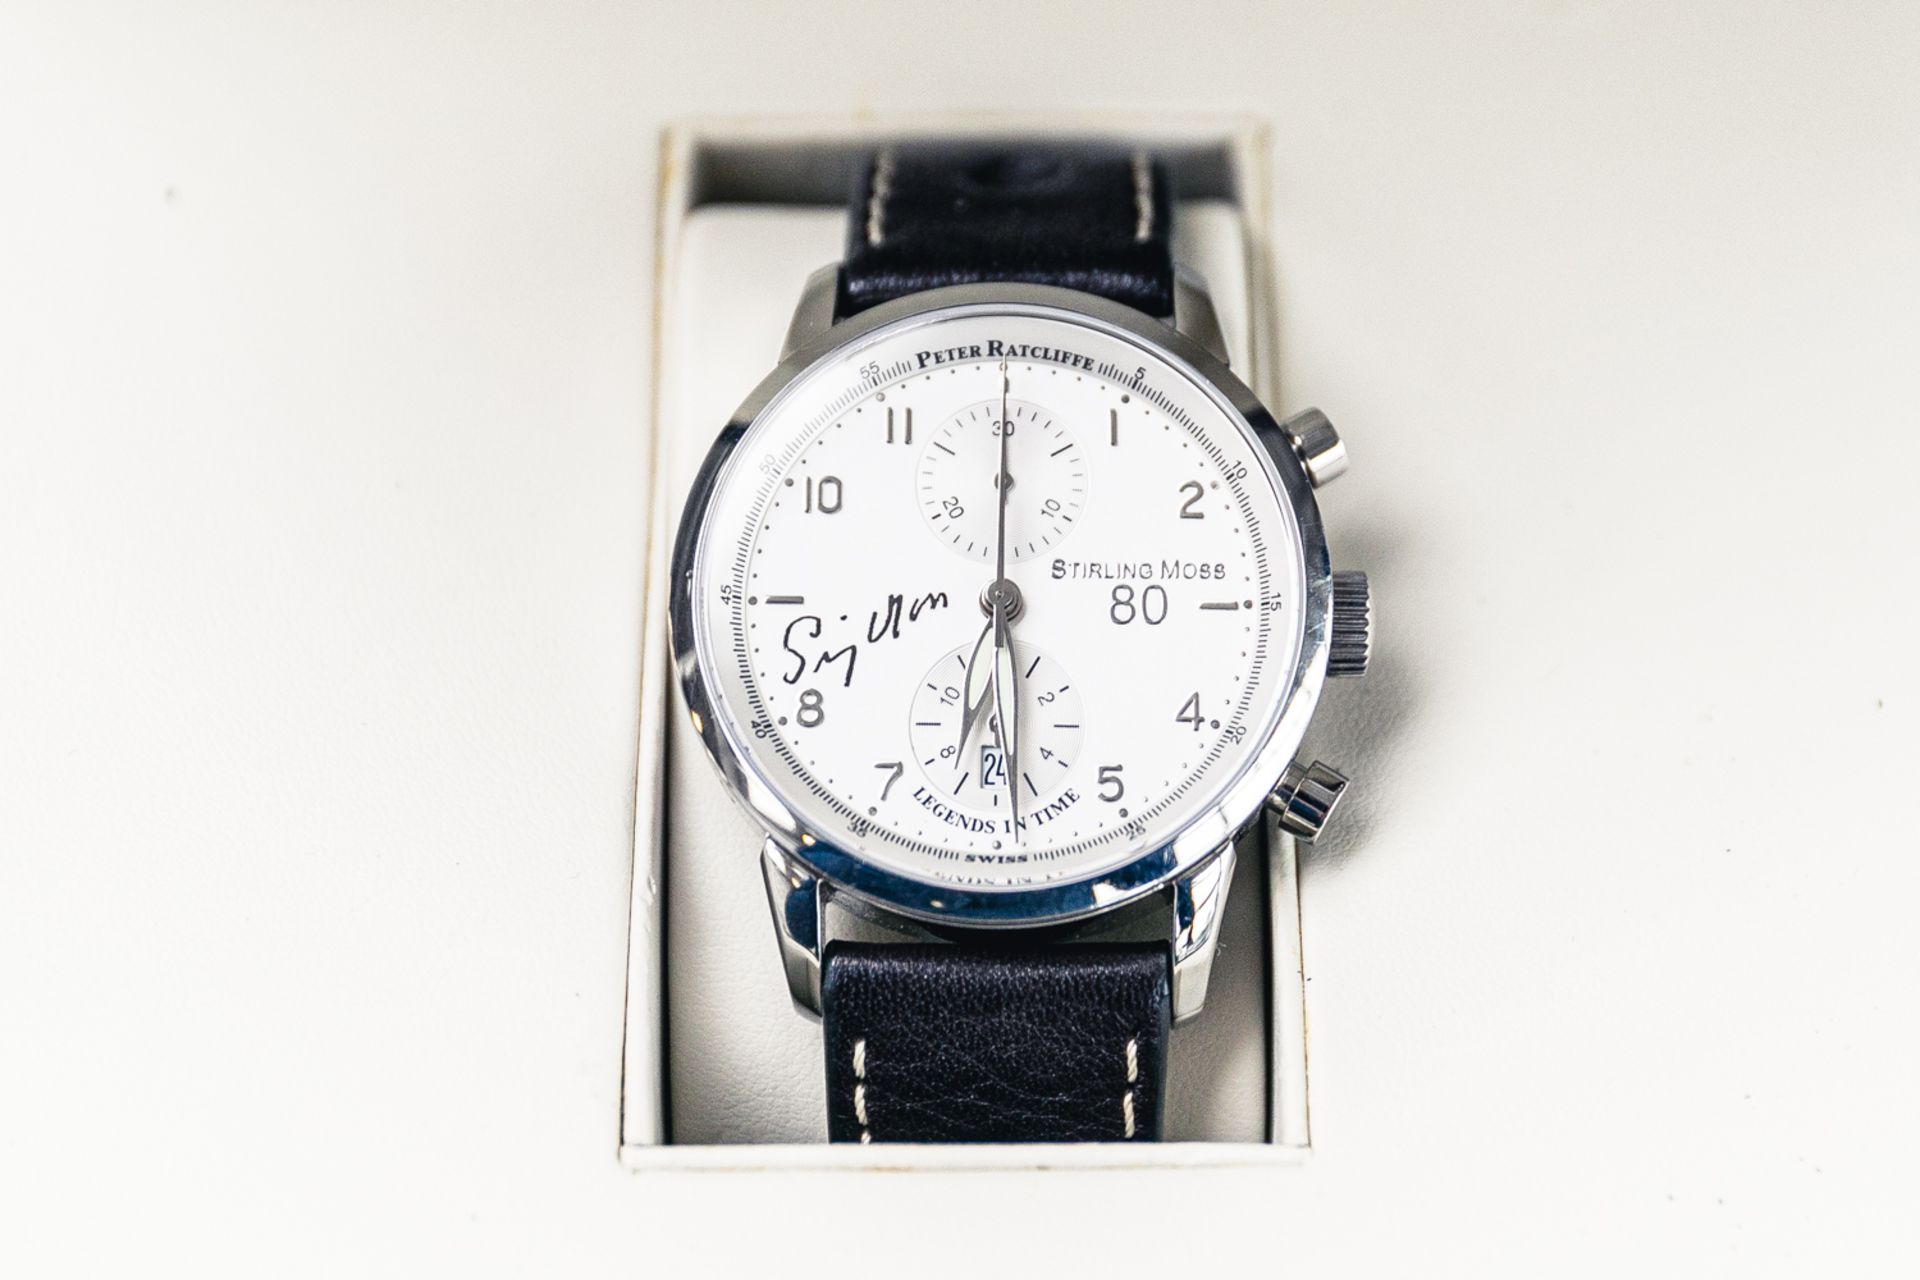 Stirling's personal 2011 Le Mans watch